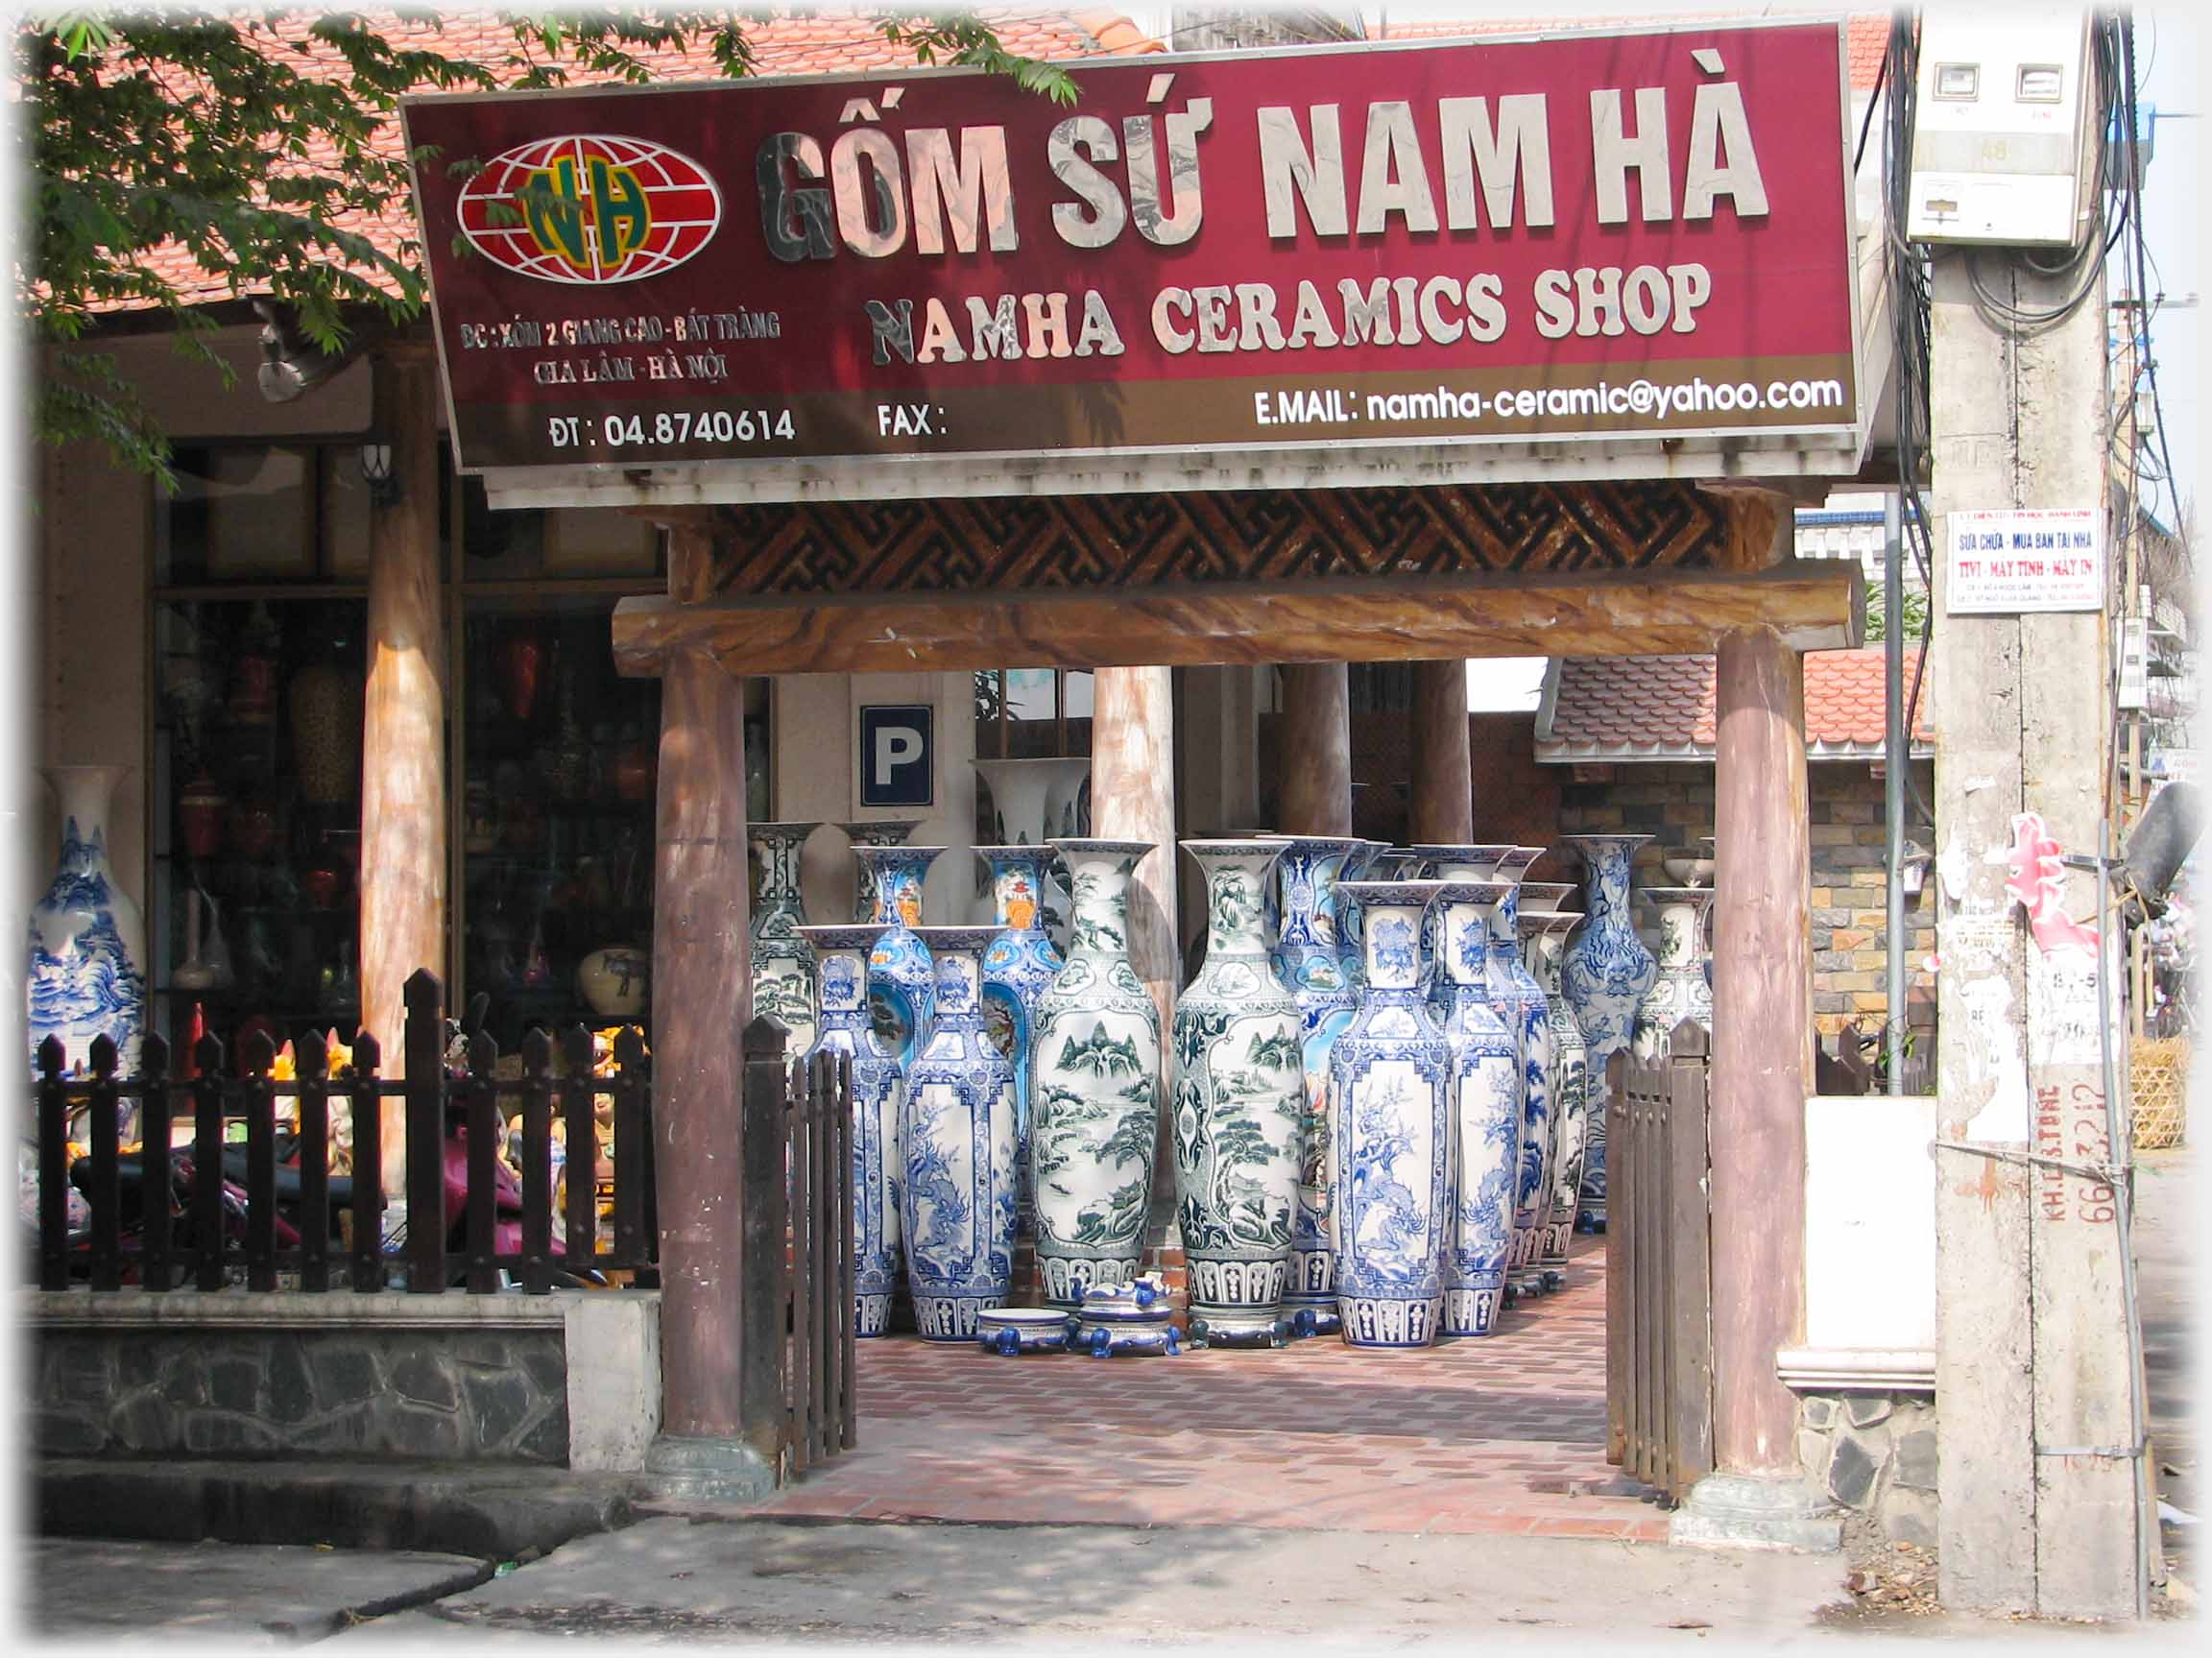 Entrance to Nam Ha shop with many vases standing by door.